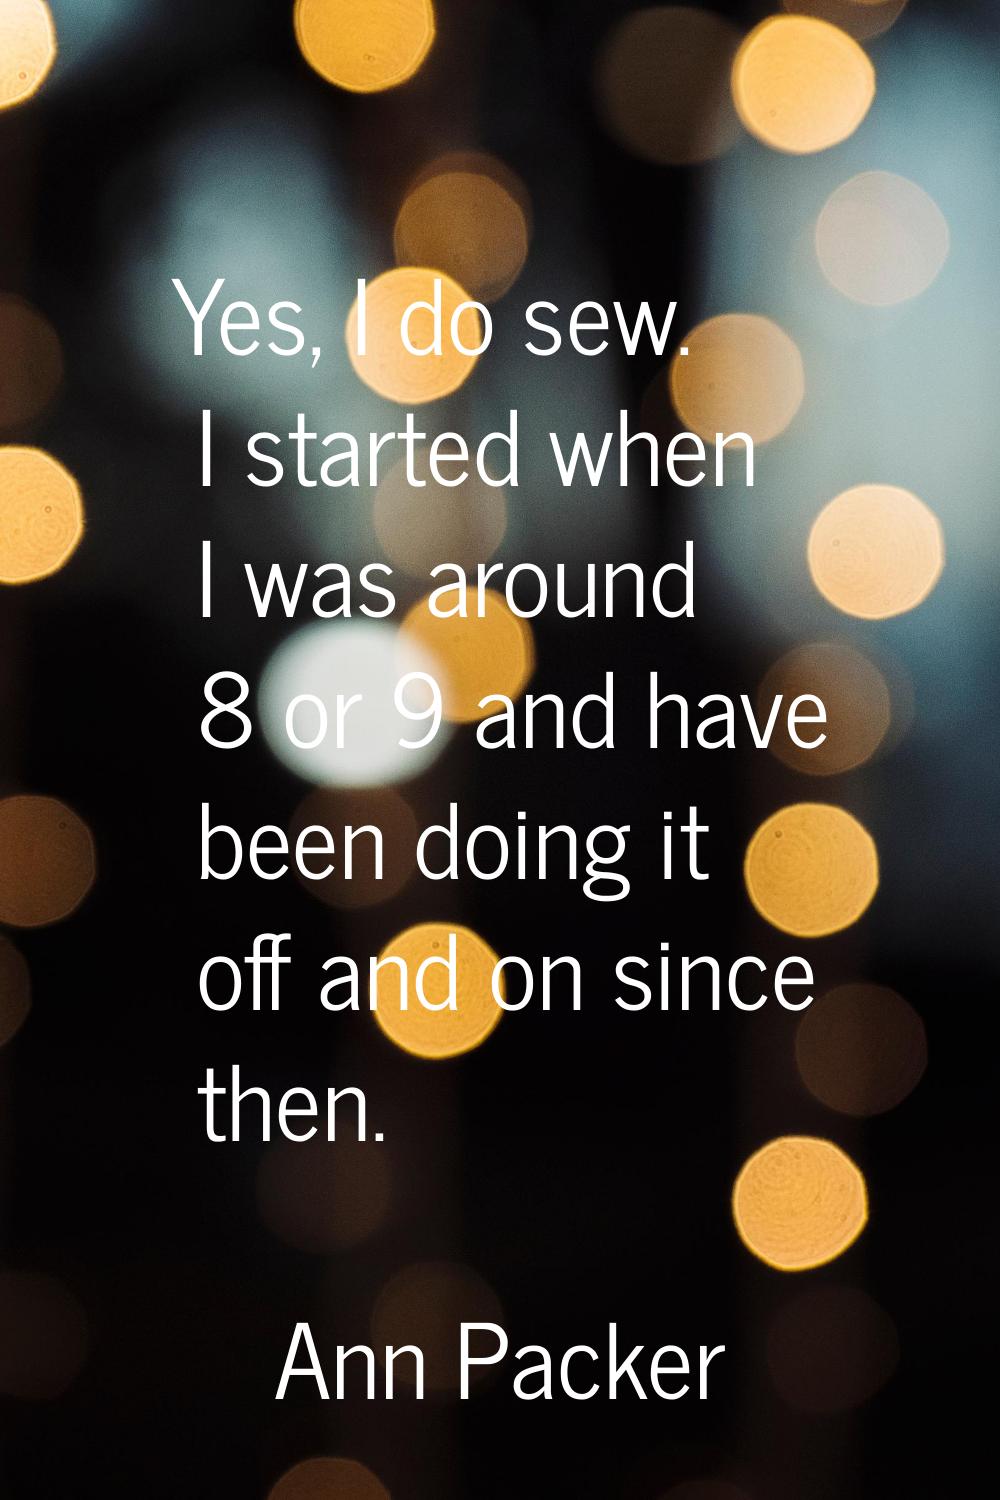 Yes, I do sew. I started when I was around 8 or 9 and have been doing it off and on since then.